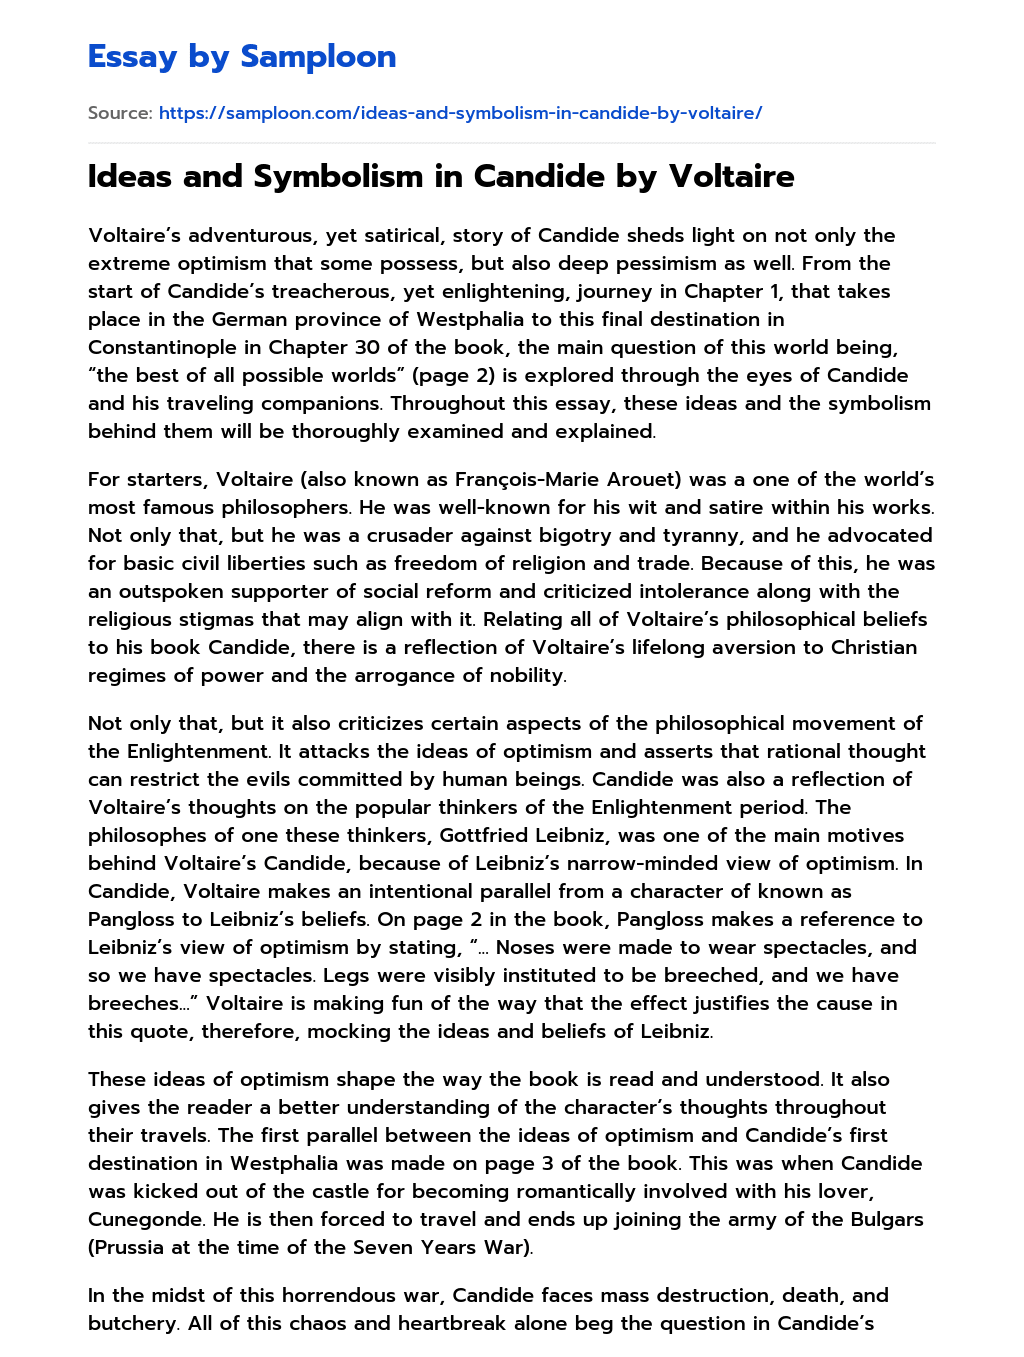 Ideas and Symbolism in Candide by Voltaire essay